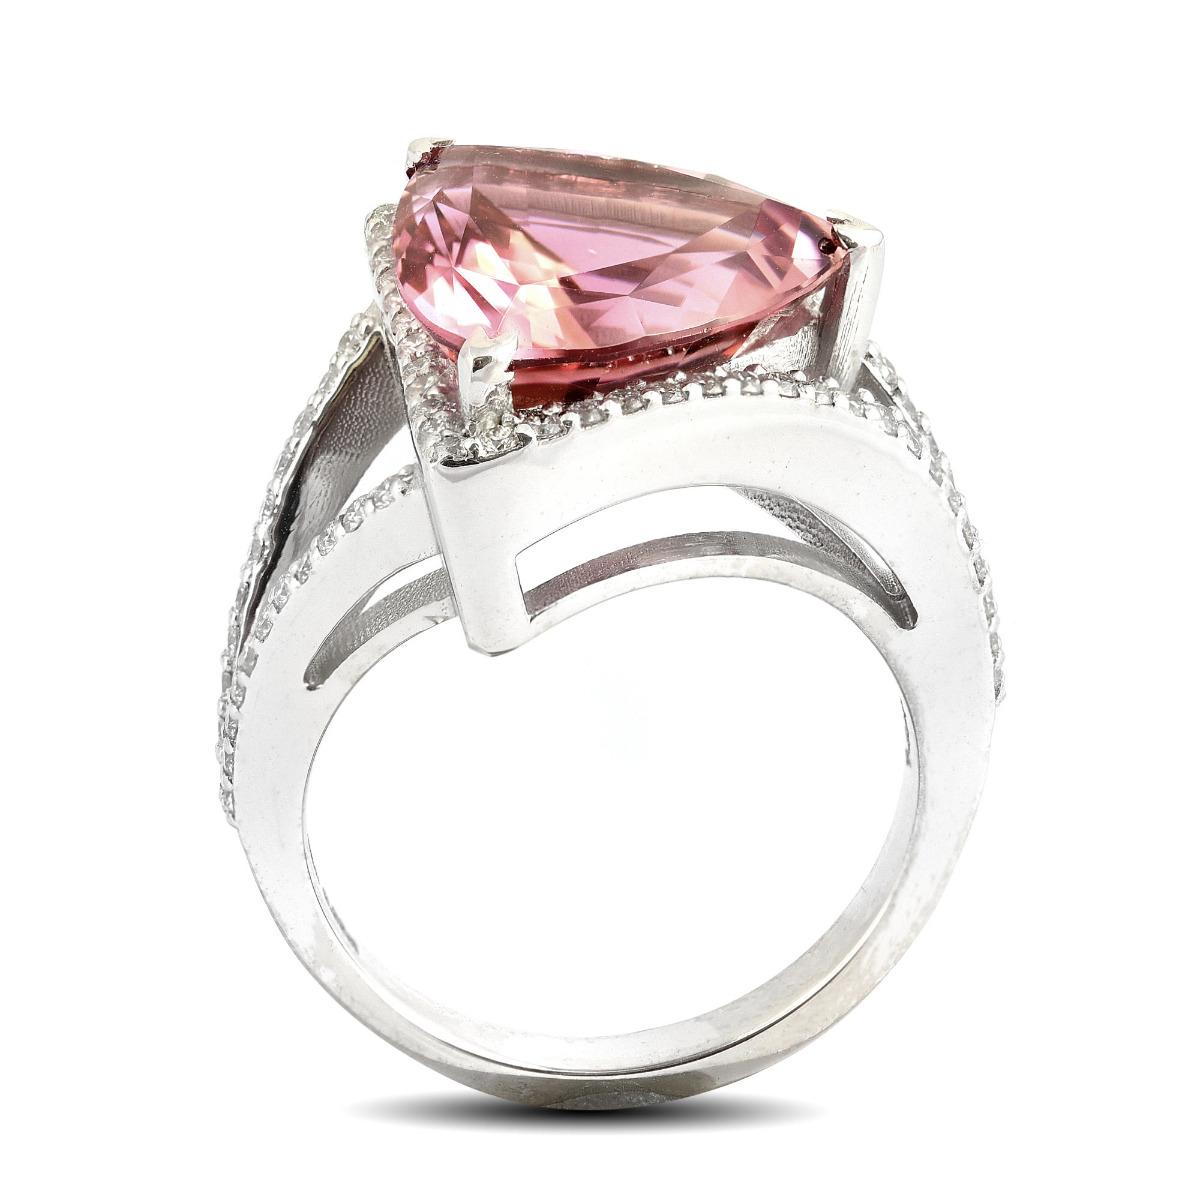 A trillion cut Pink Tourmaline, here is a gemstone that comes with a vivid color and an eye clean appearance. Tourmalines are known for their modern symbolism of love and with the feminine colors of this gem there will be no question about it. Set